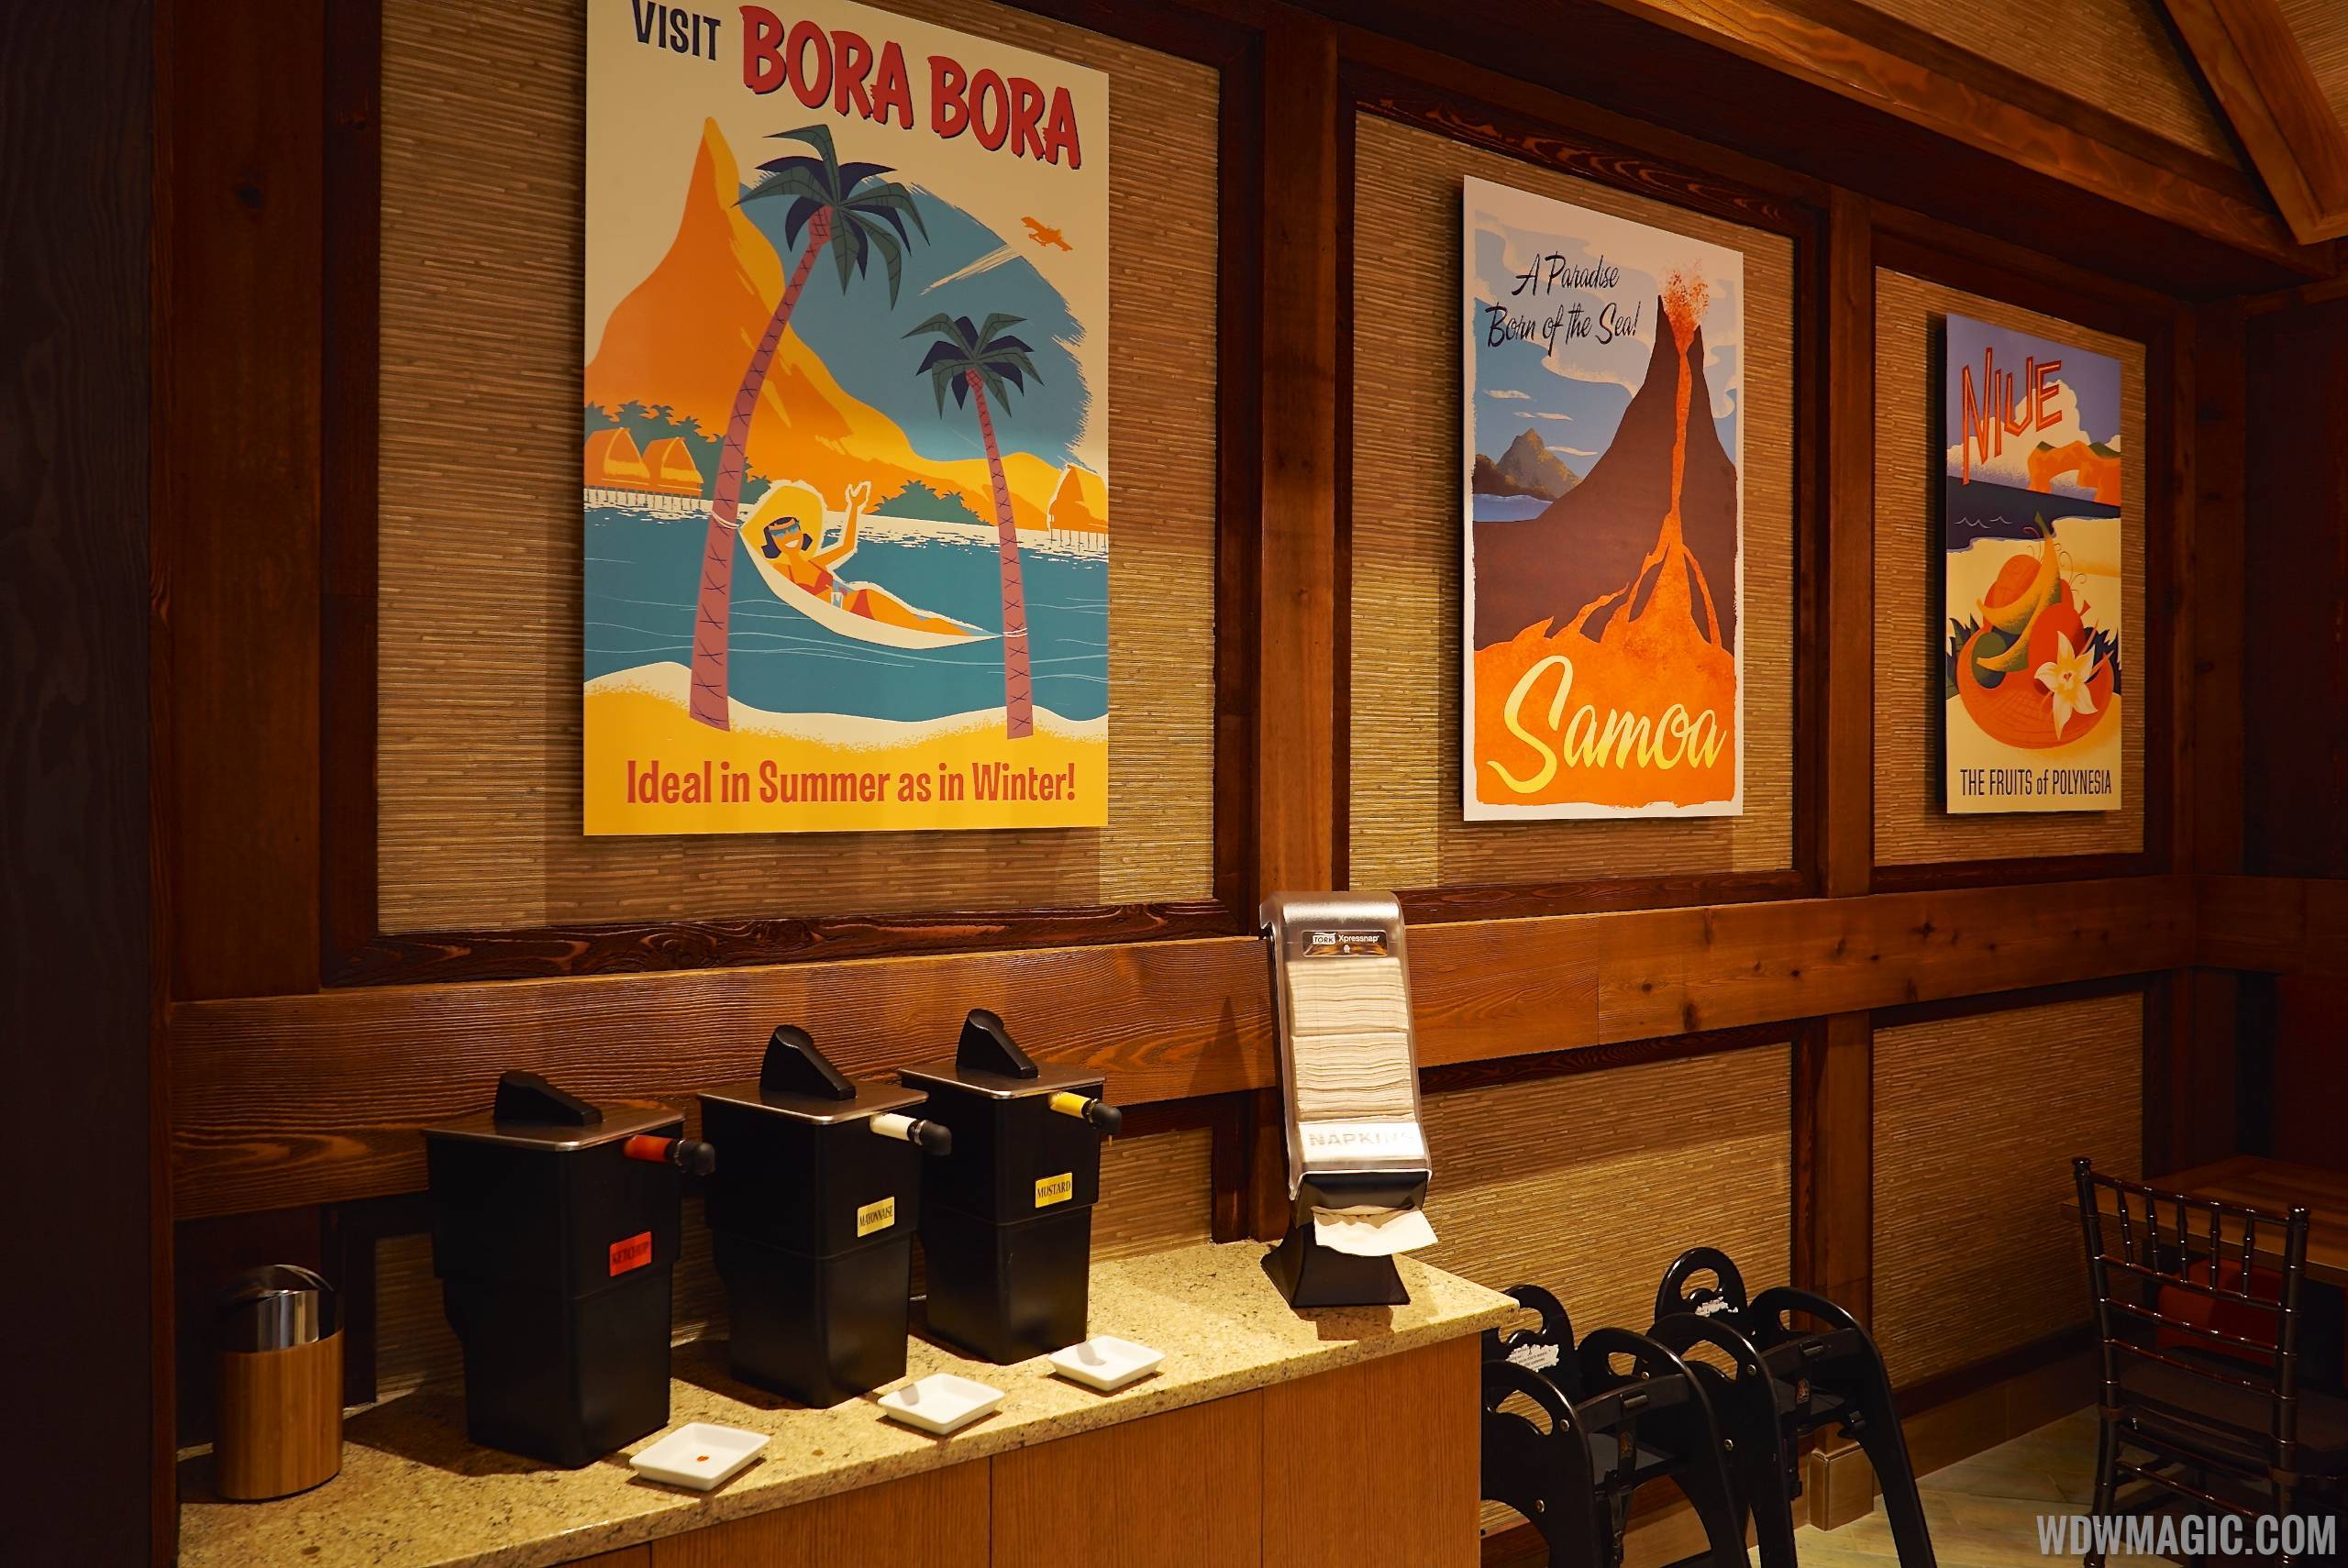 PHOTOS - Newly refurbished Captain Cook's reopens at Disney's Polynesian Village Resort